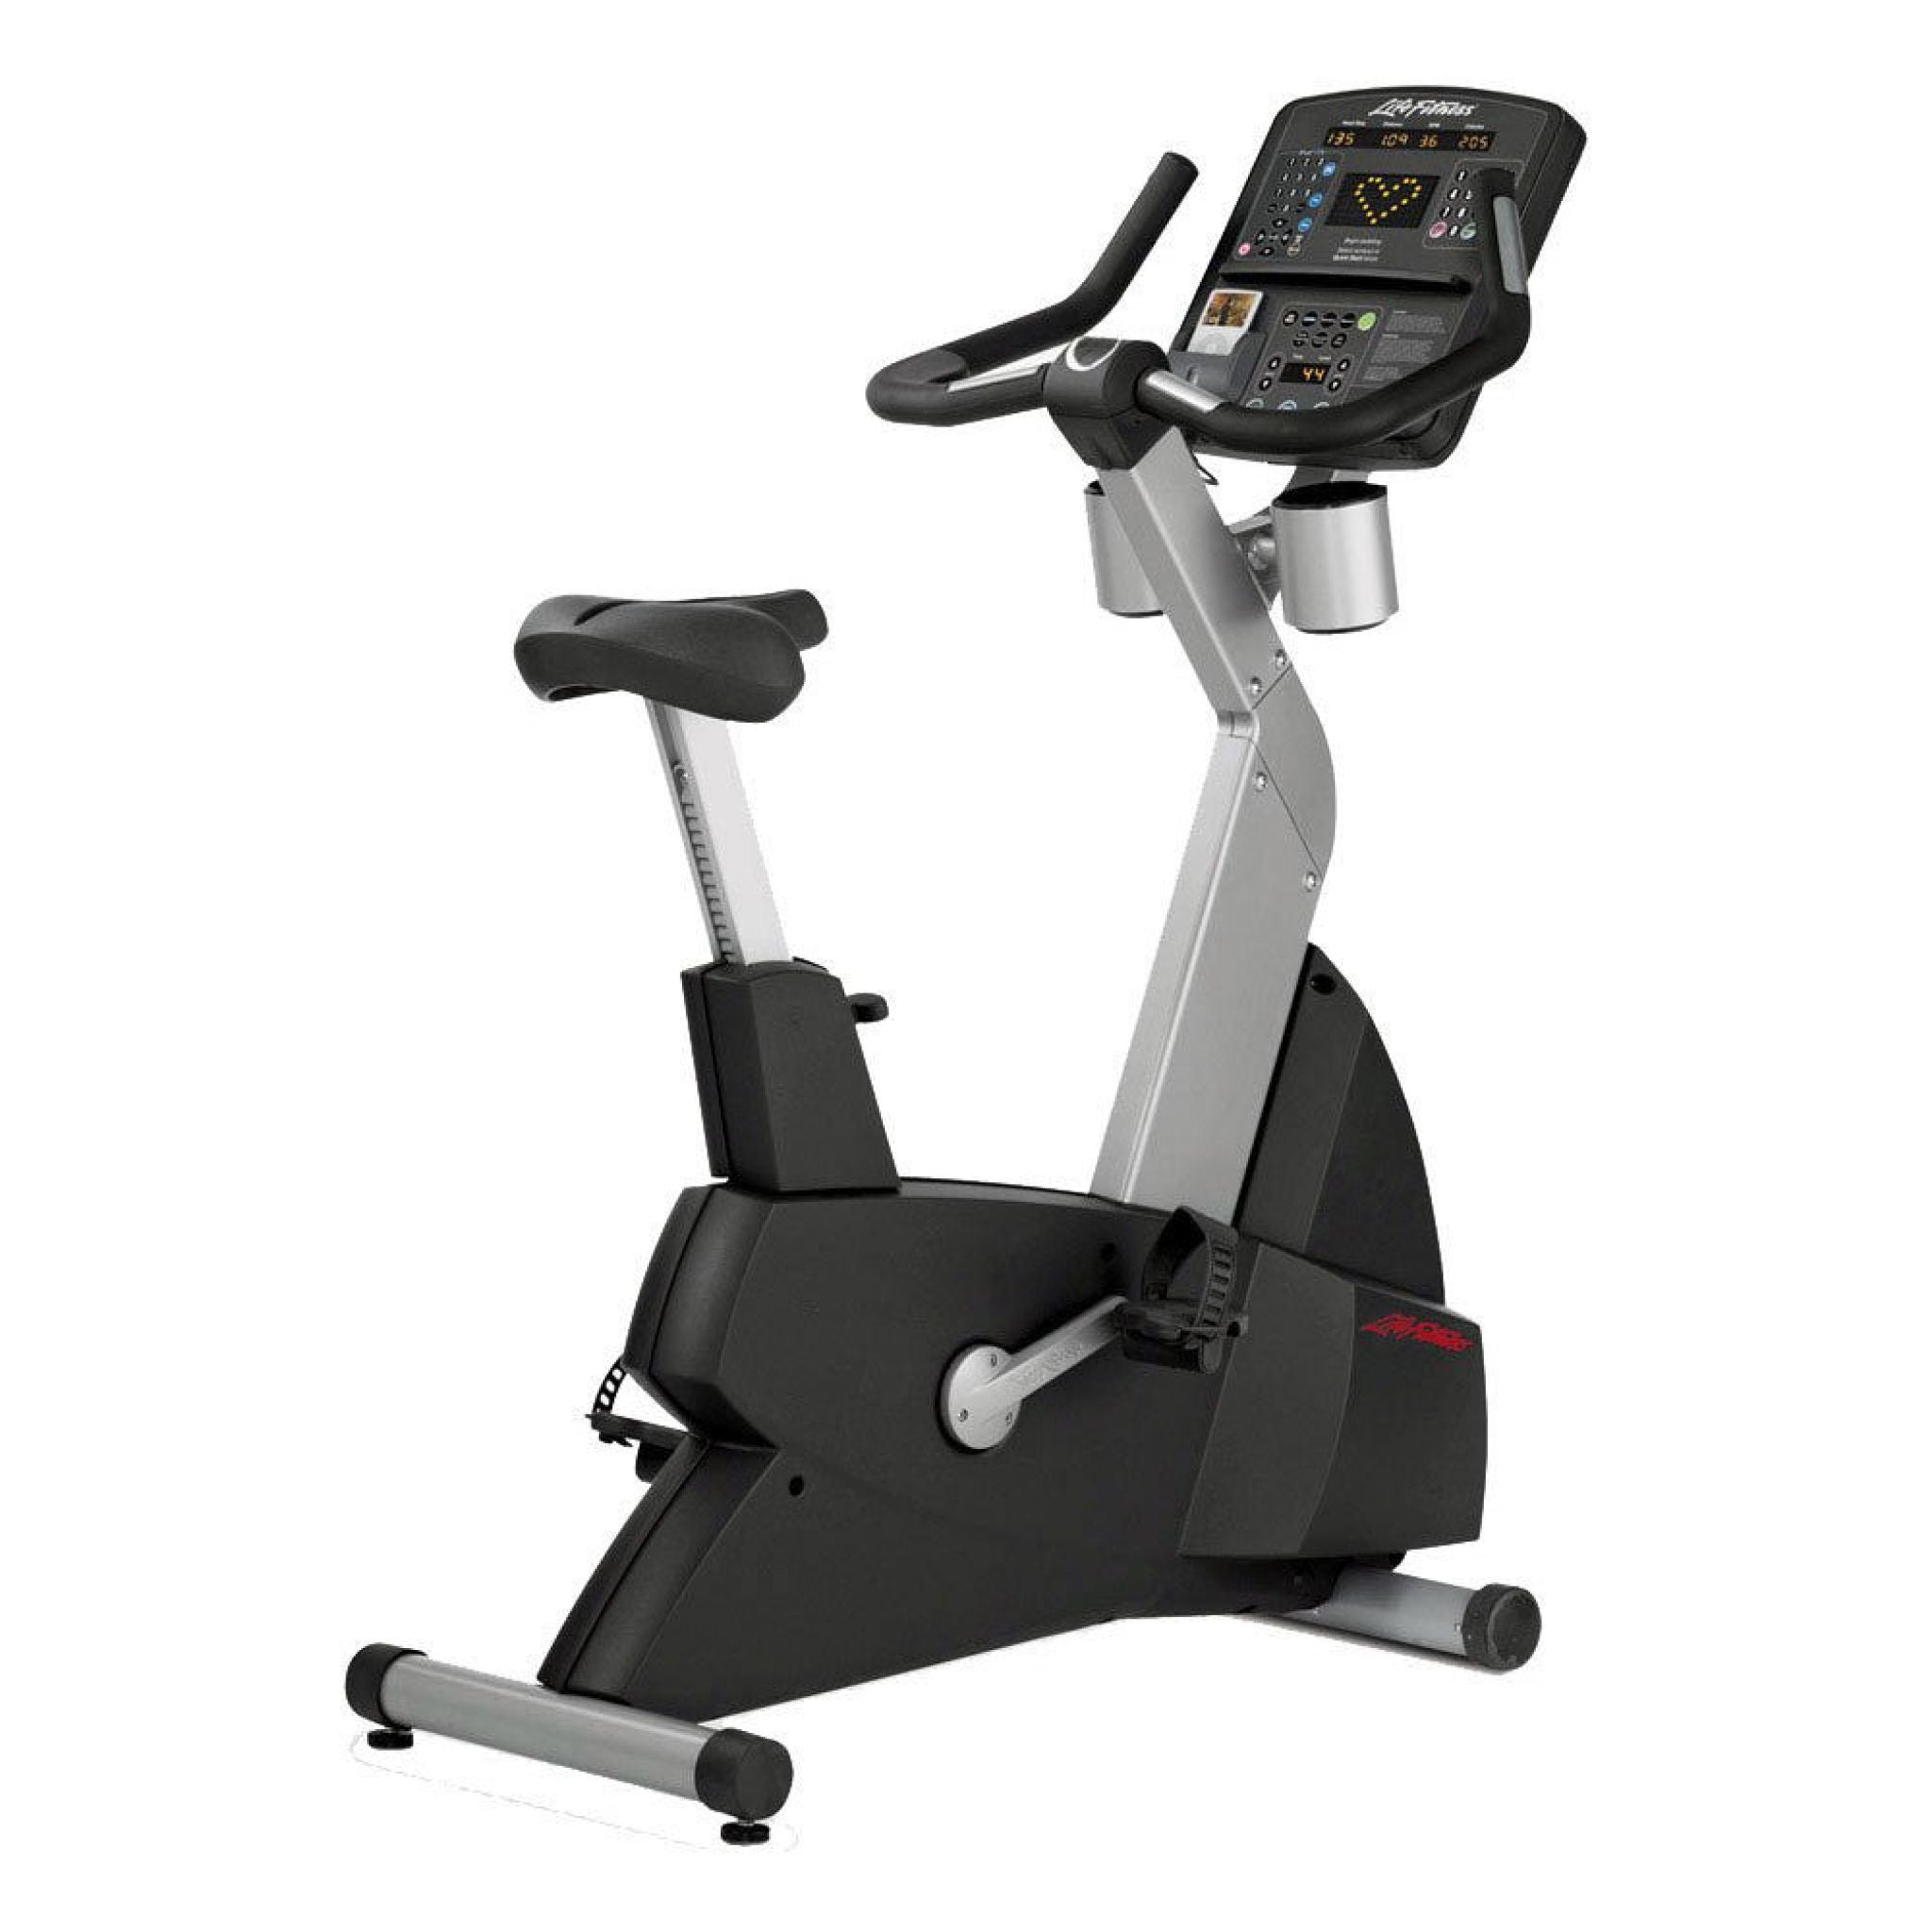 Back right view of the Life Fitness CLSC Upright Bike